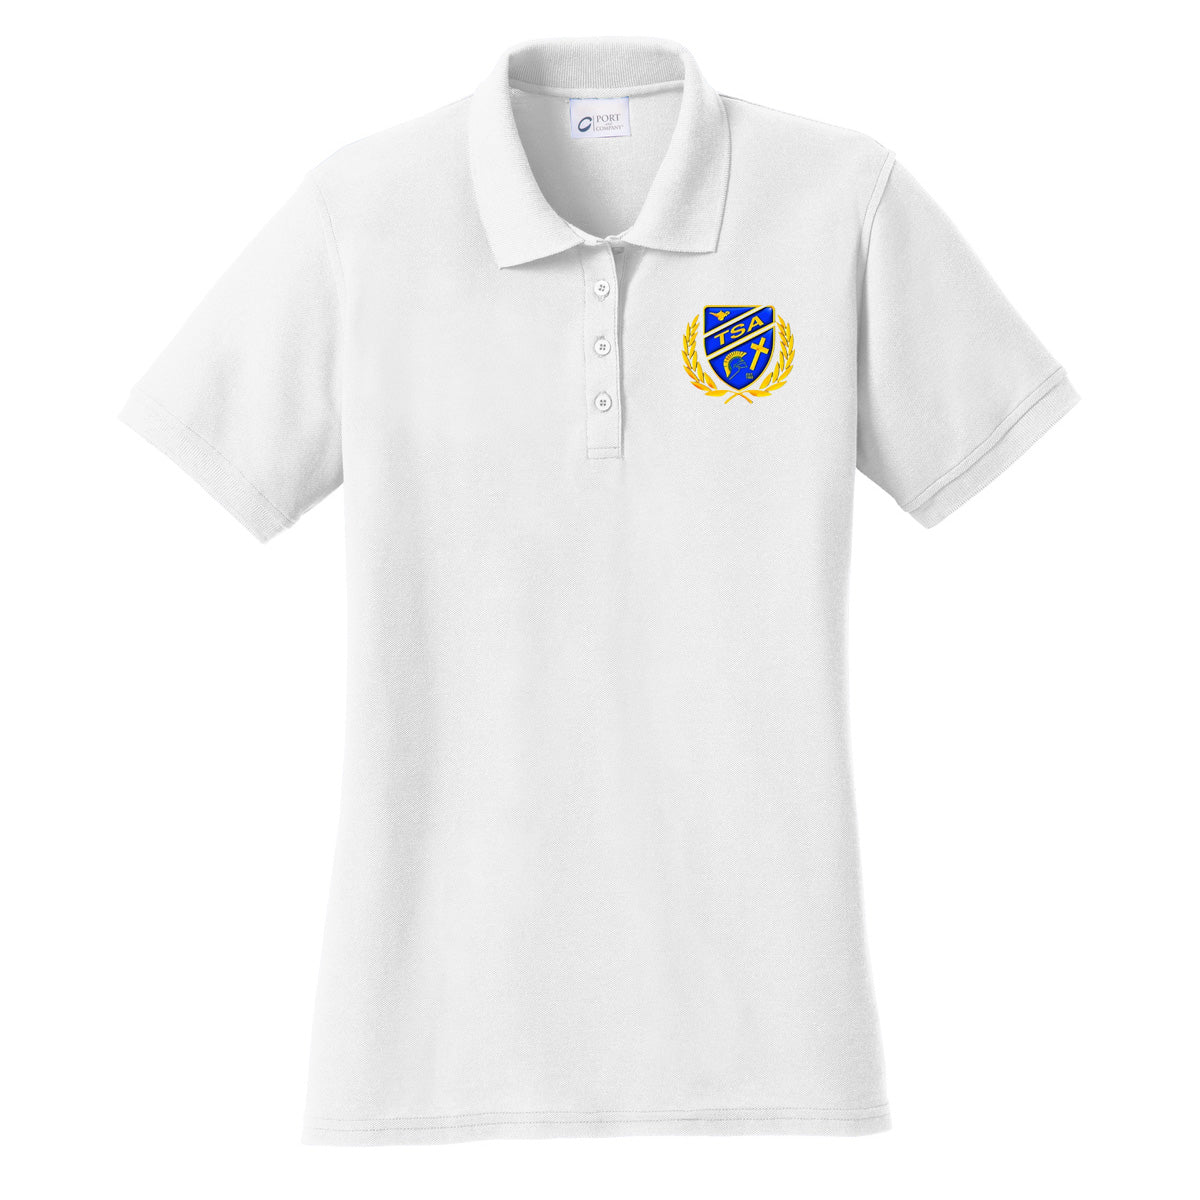 Tattnall - Ladies Cotton Pique Polo with Crest - White (LKP155) - Southern Grace Creations